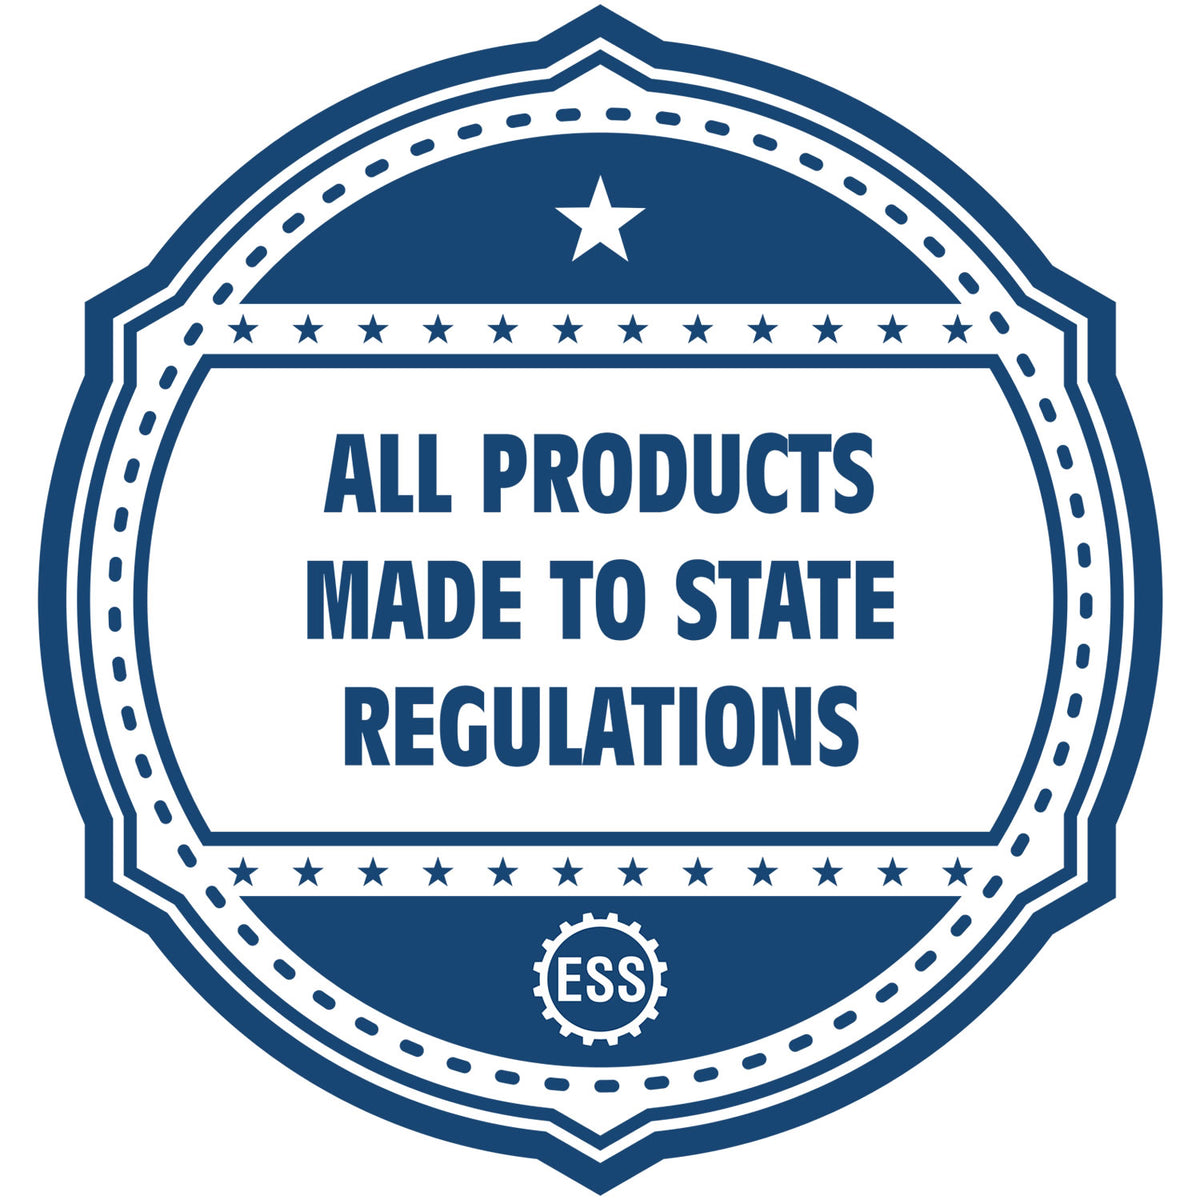 An icon or badge element for the Montana Engineer Desk Seal showing that this product is made in compliance with state regulations.